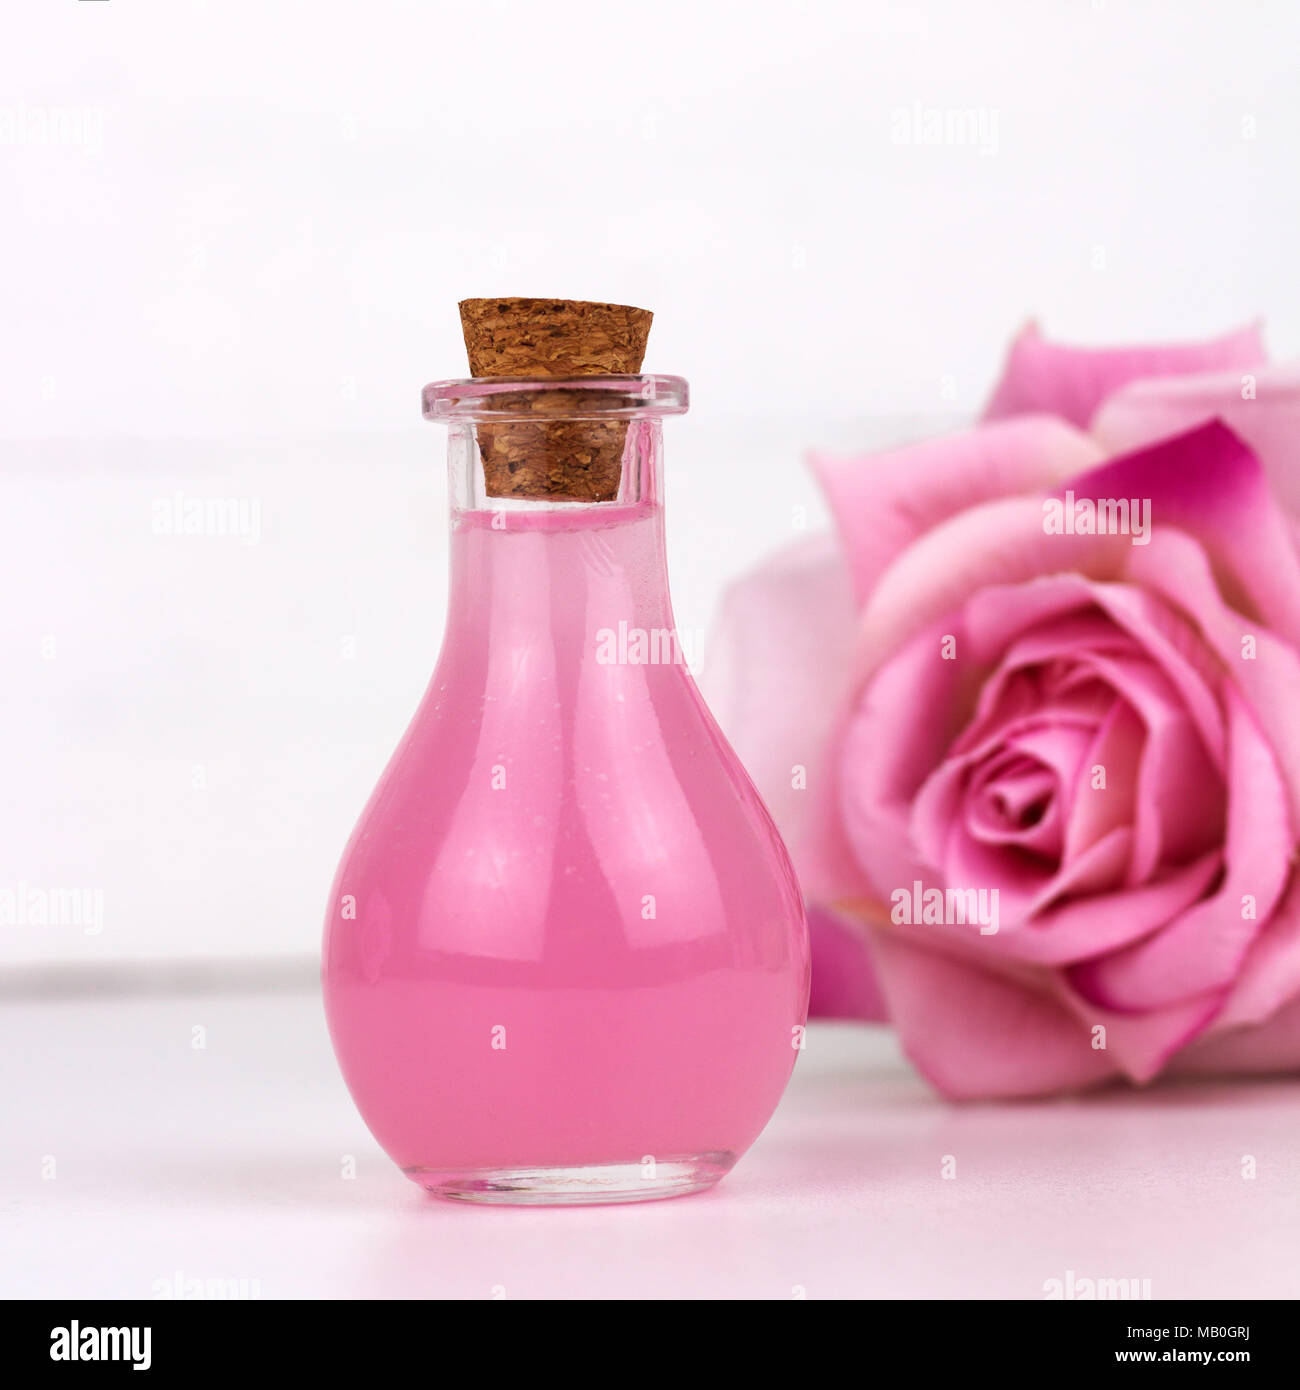 rose essential oil bottle blurred rose flower white background square Stock Photo